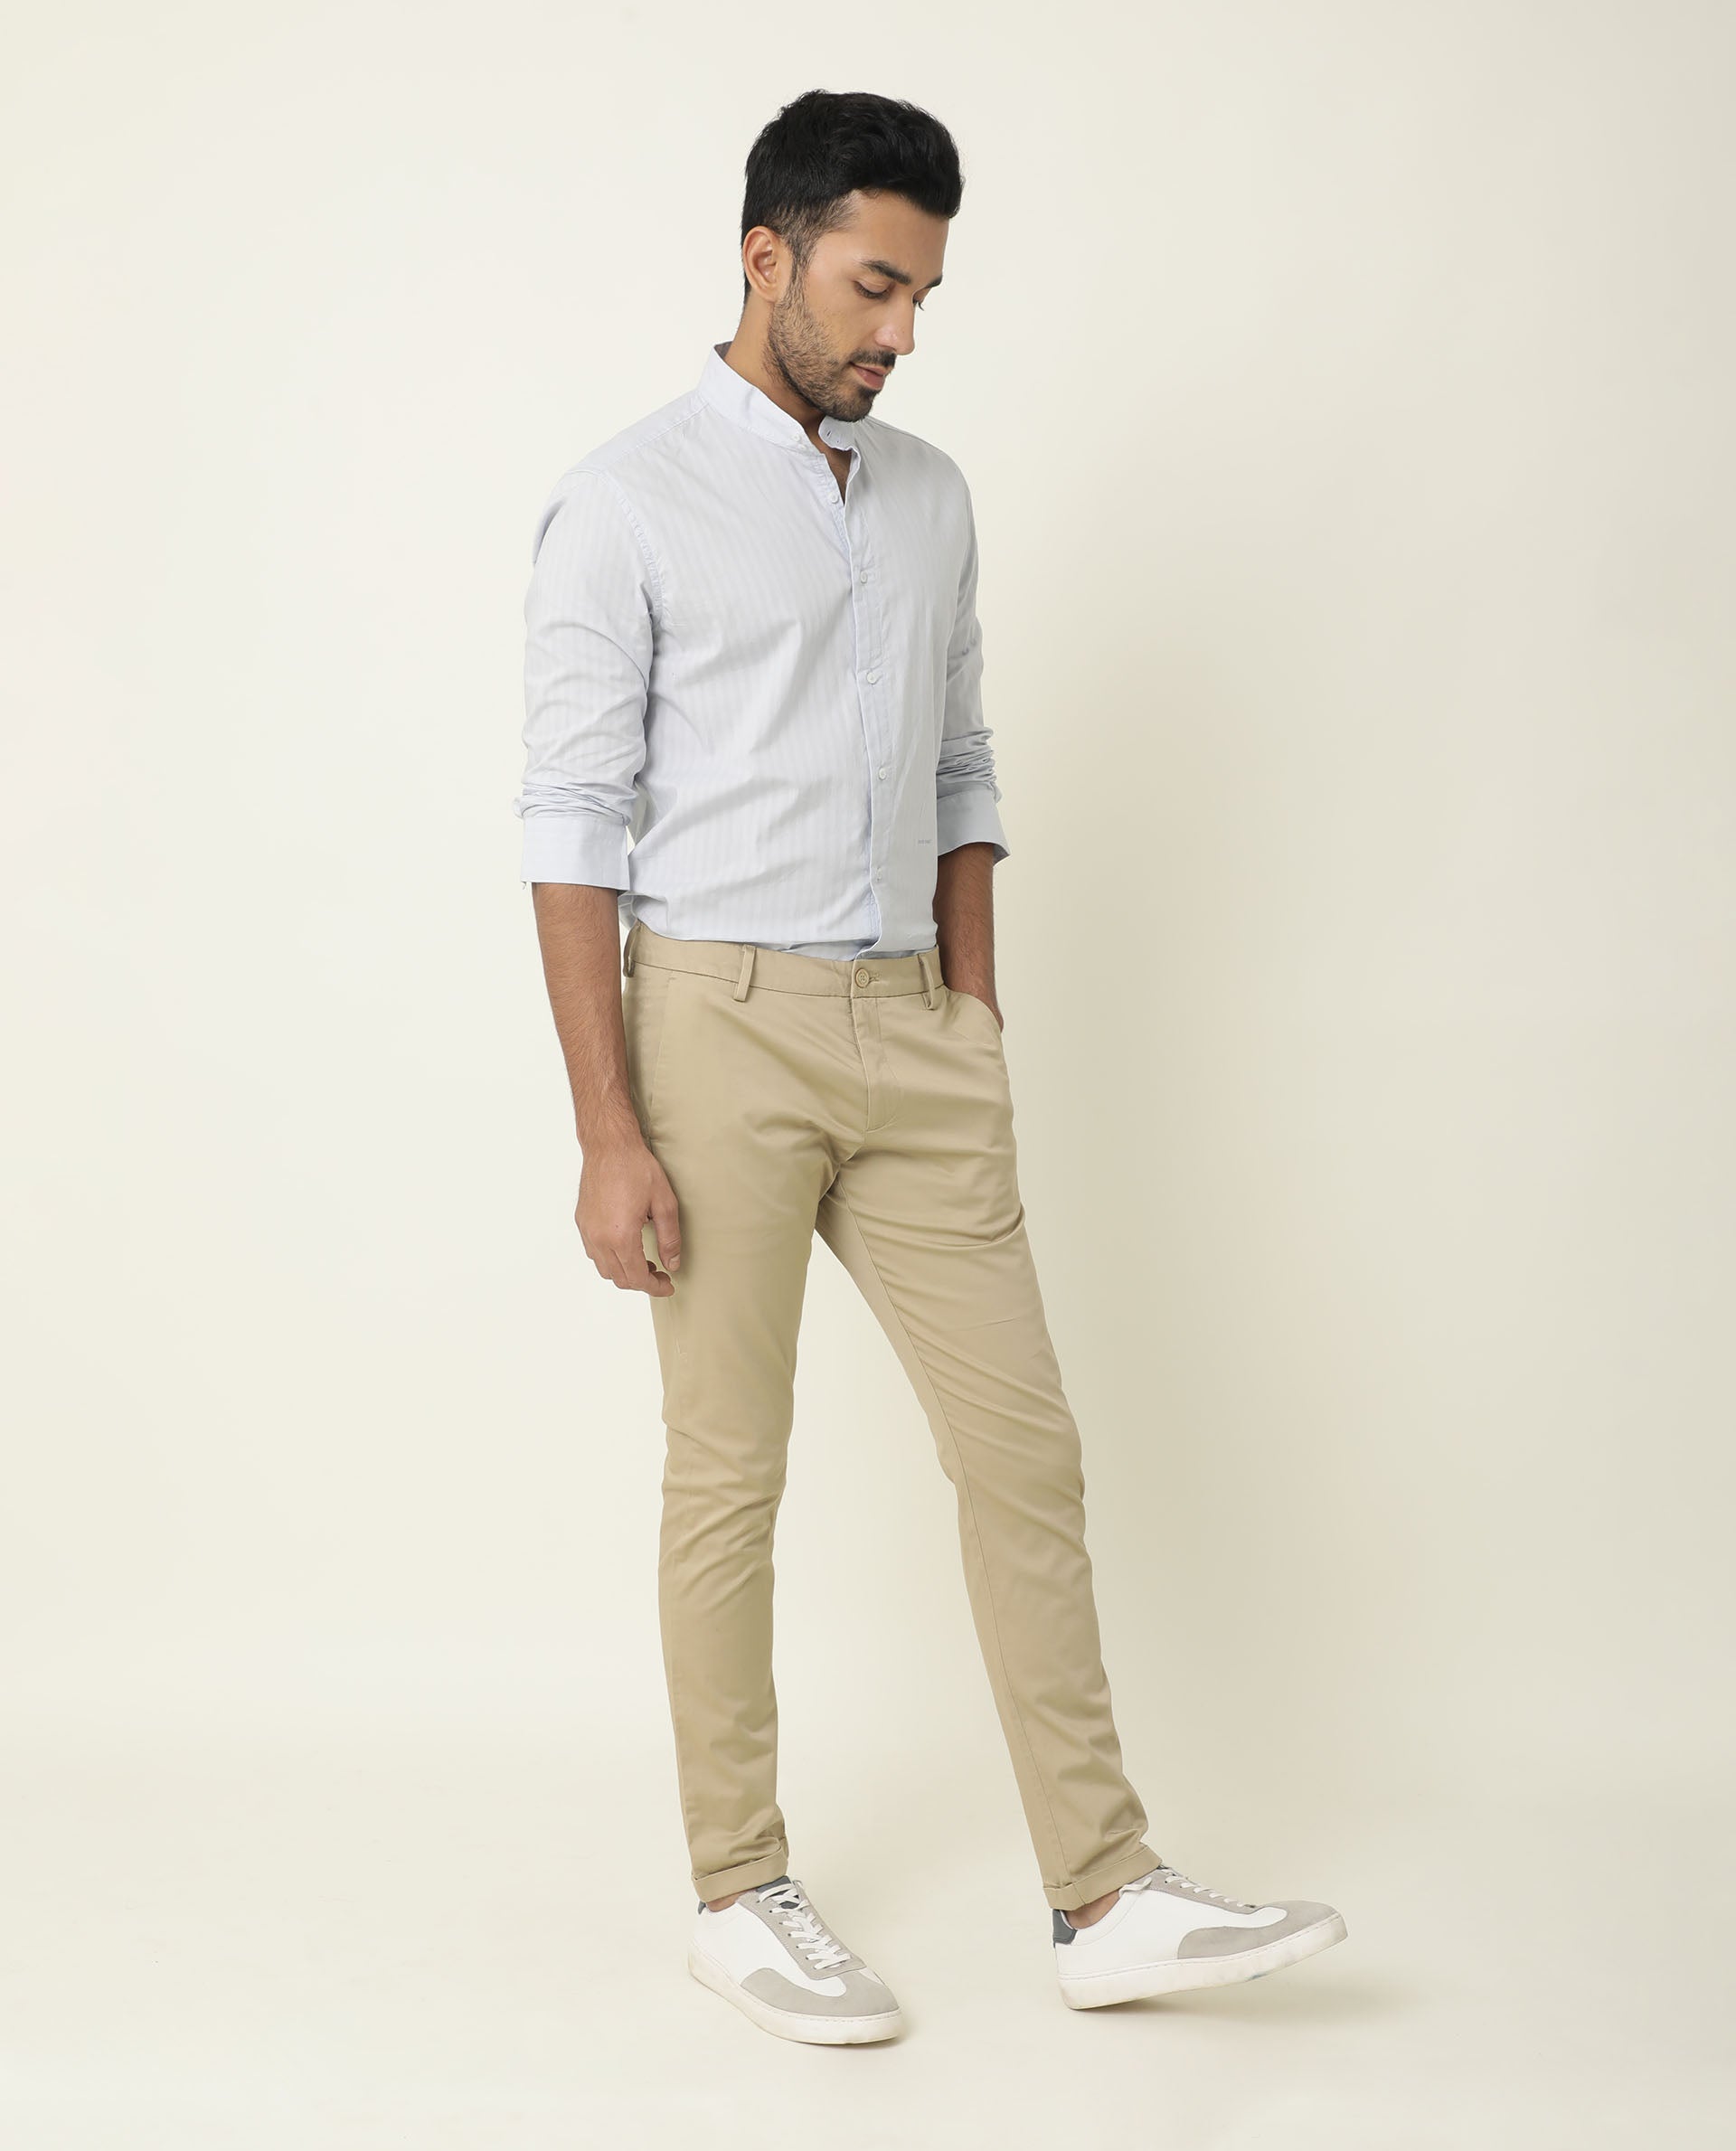 How to Style Tan Trousers: 10 Outfit Ideas That Will Elevate Your Wardrobe!